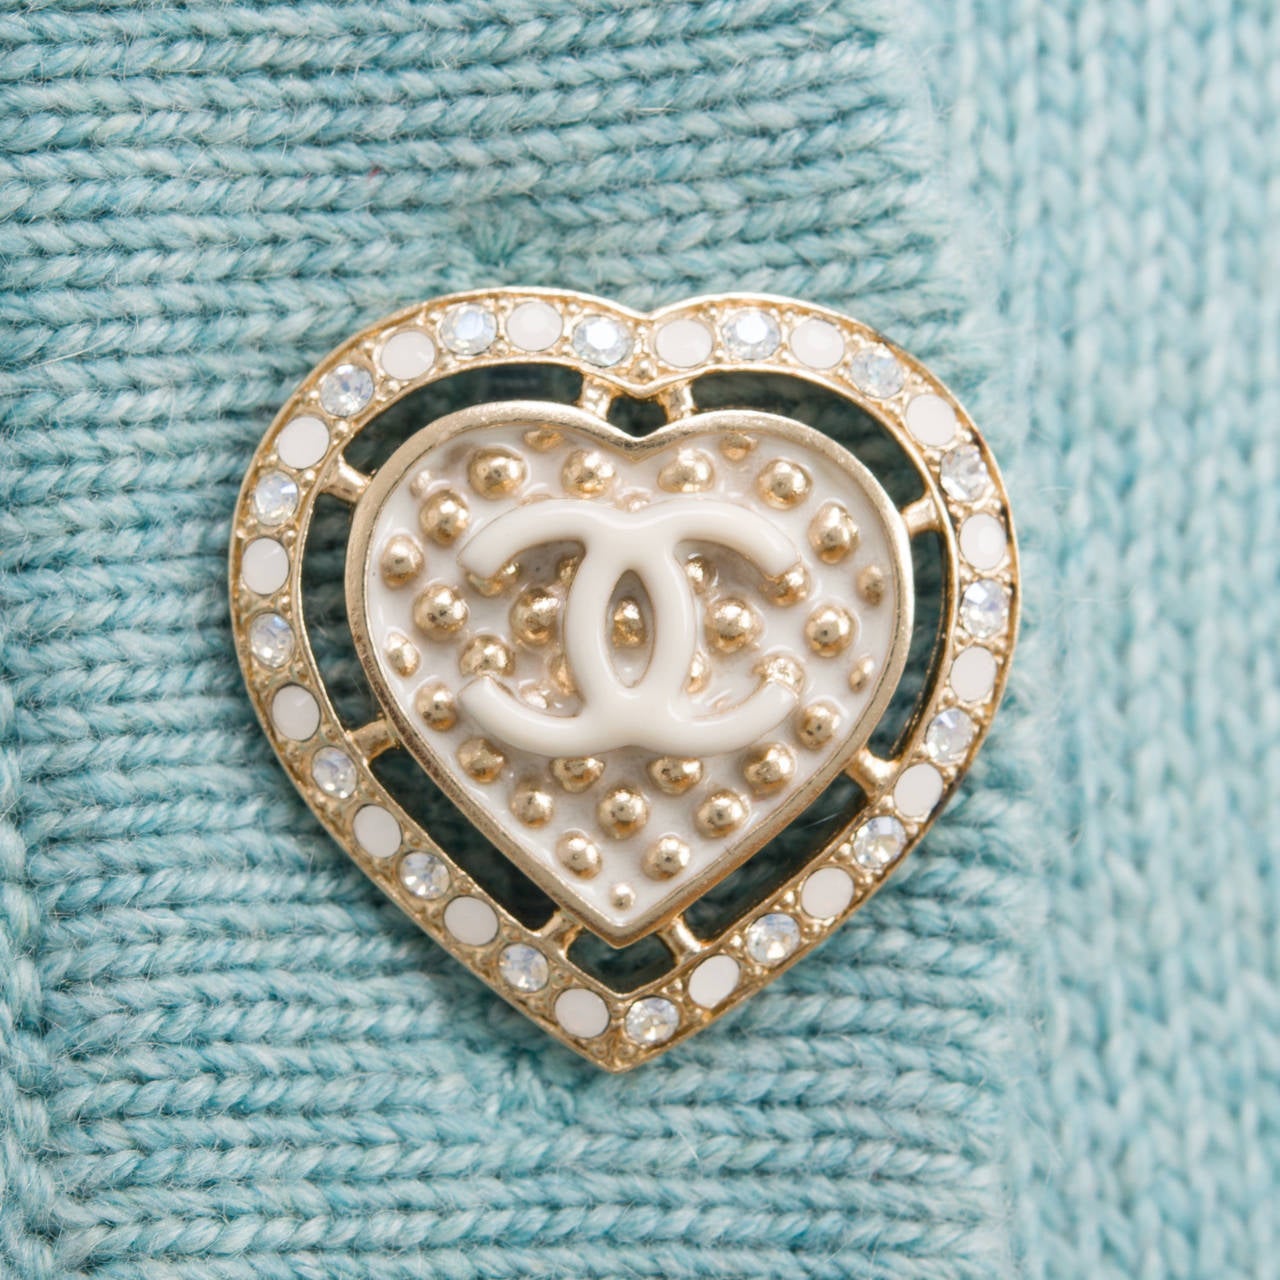 Chanel seafoam green cashmere sweater coat with round neckline, six CC-stamped jewel and enamel silver tone heart buttons, hip level patch pockets, and vertical ribbed trimming  at pockets, cuff, and bottom.
 
Fabric: 100% cashmere
 
Collection: